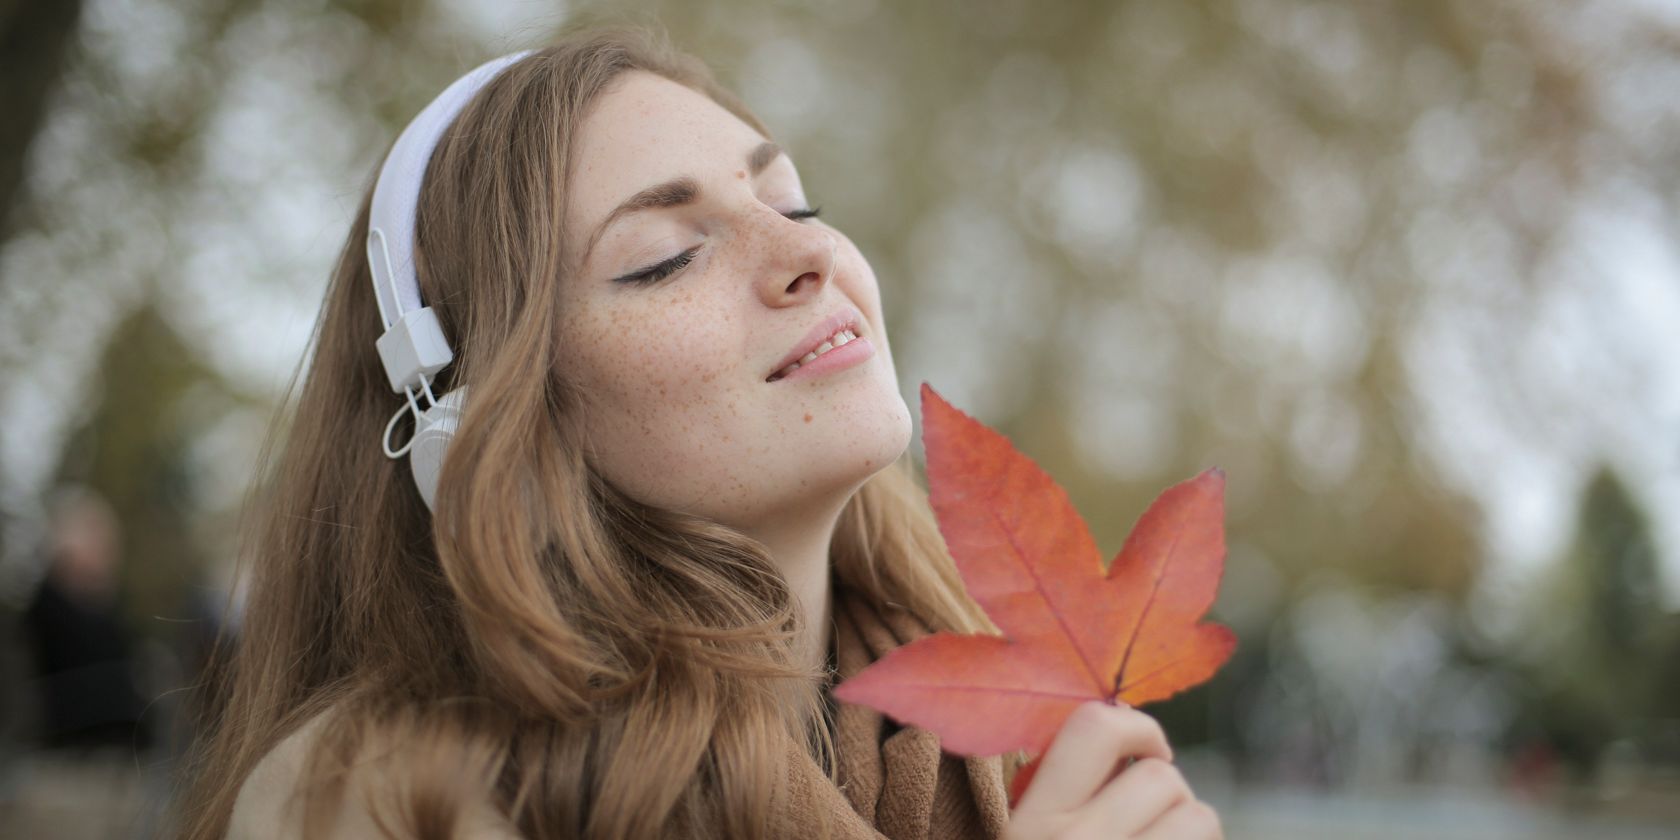 A young woman listens to headphones while holding a leaf outdoors